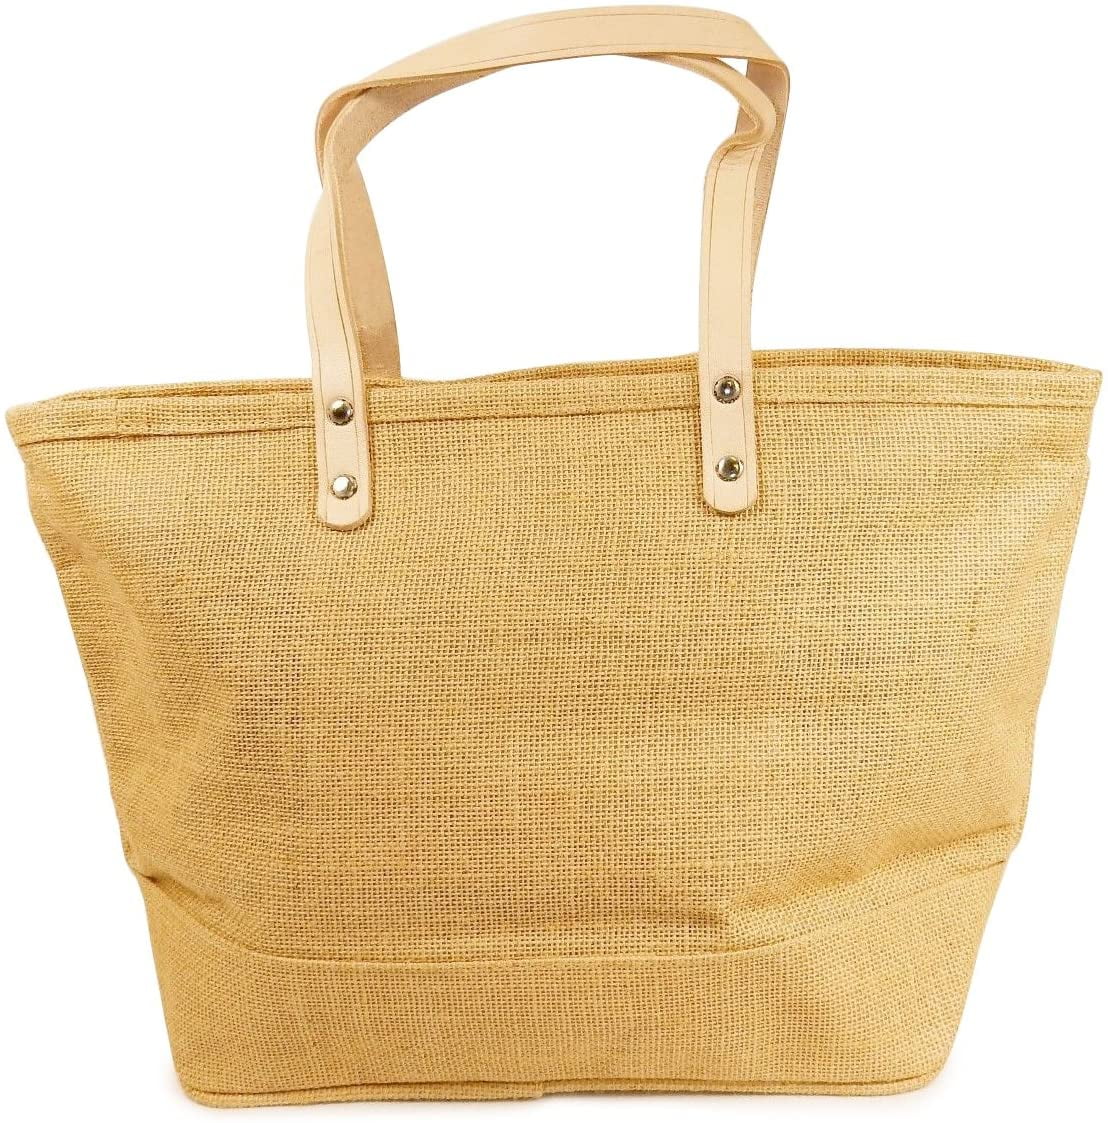 Jute Shopping Bag with Leather Handle Waterproof Travel Picnic Tote Bag S L 